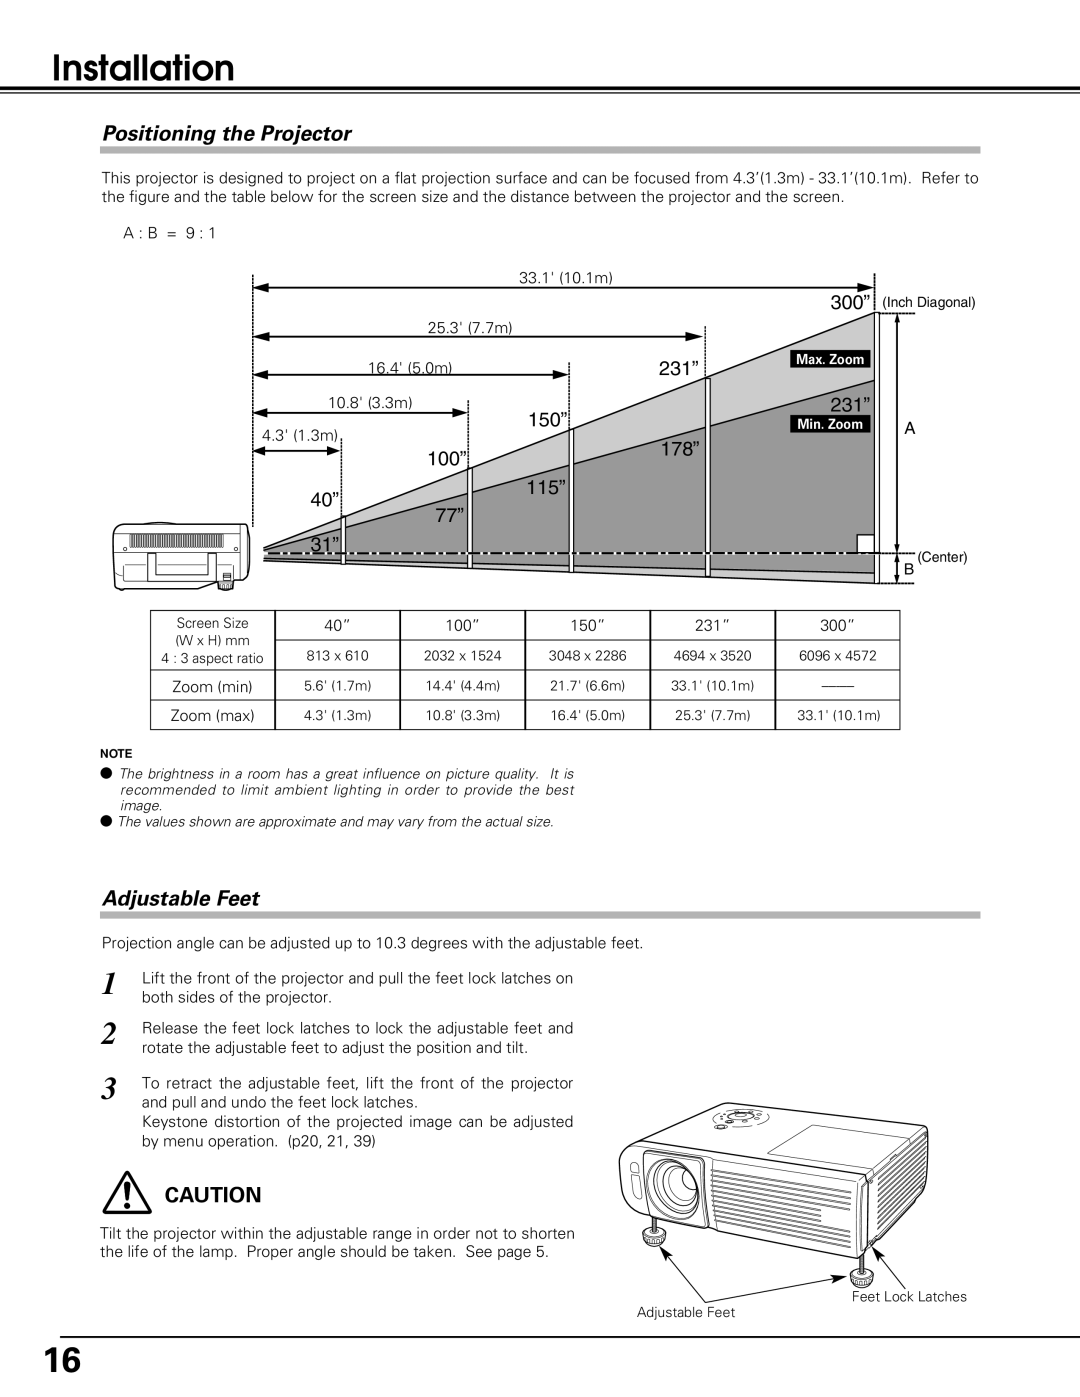 Eiki LC-XE10 instruction manual Installation, Positioning the Projector, Adjustable Feet 